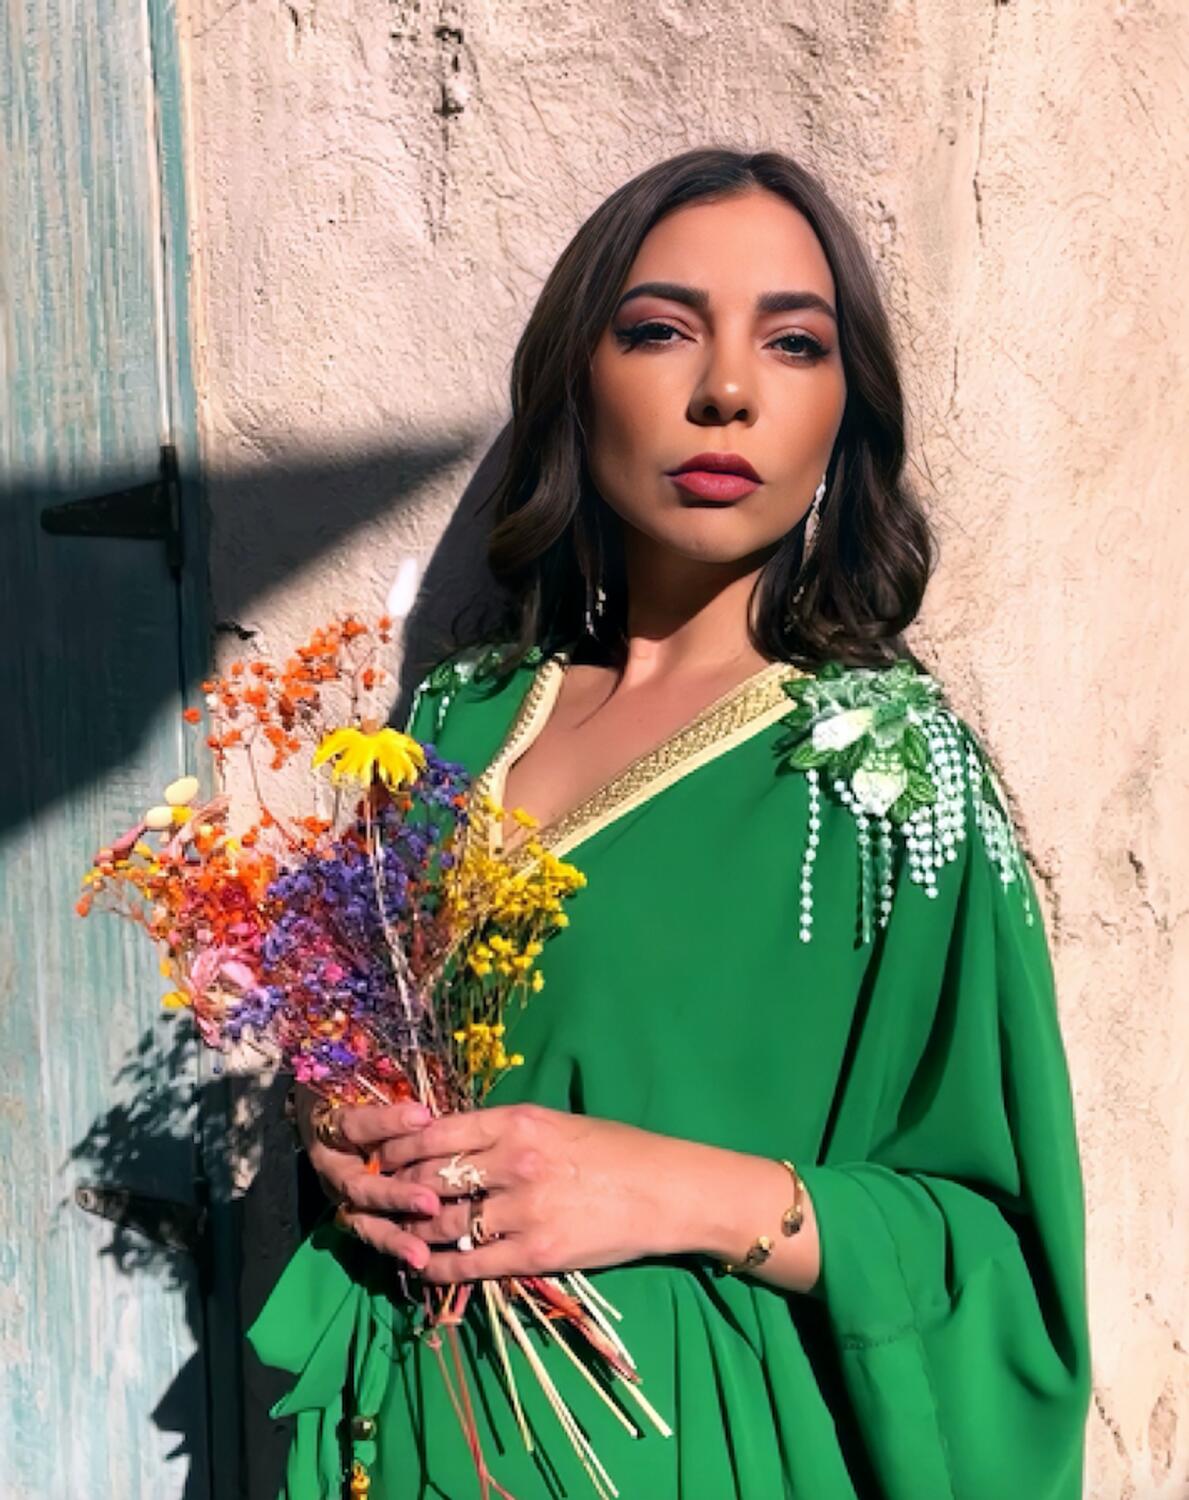 “Restyle and rewear is the game here! Fashion should always be fun, so this can be a way for you to get creative. Organise your closet, change your shopping habits, purchase statement pieces and remember, quality over quantity,' says Heba Hammad, UAE-based fashion blogger and stylist from Egypt.